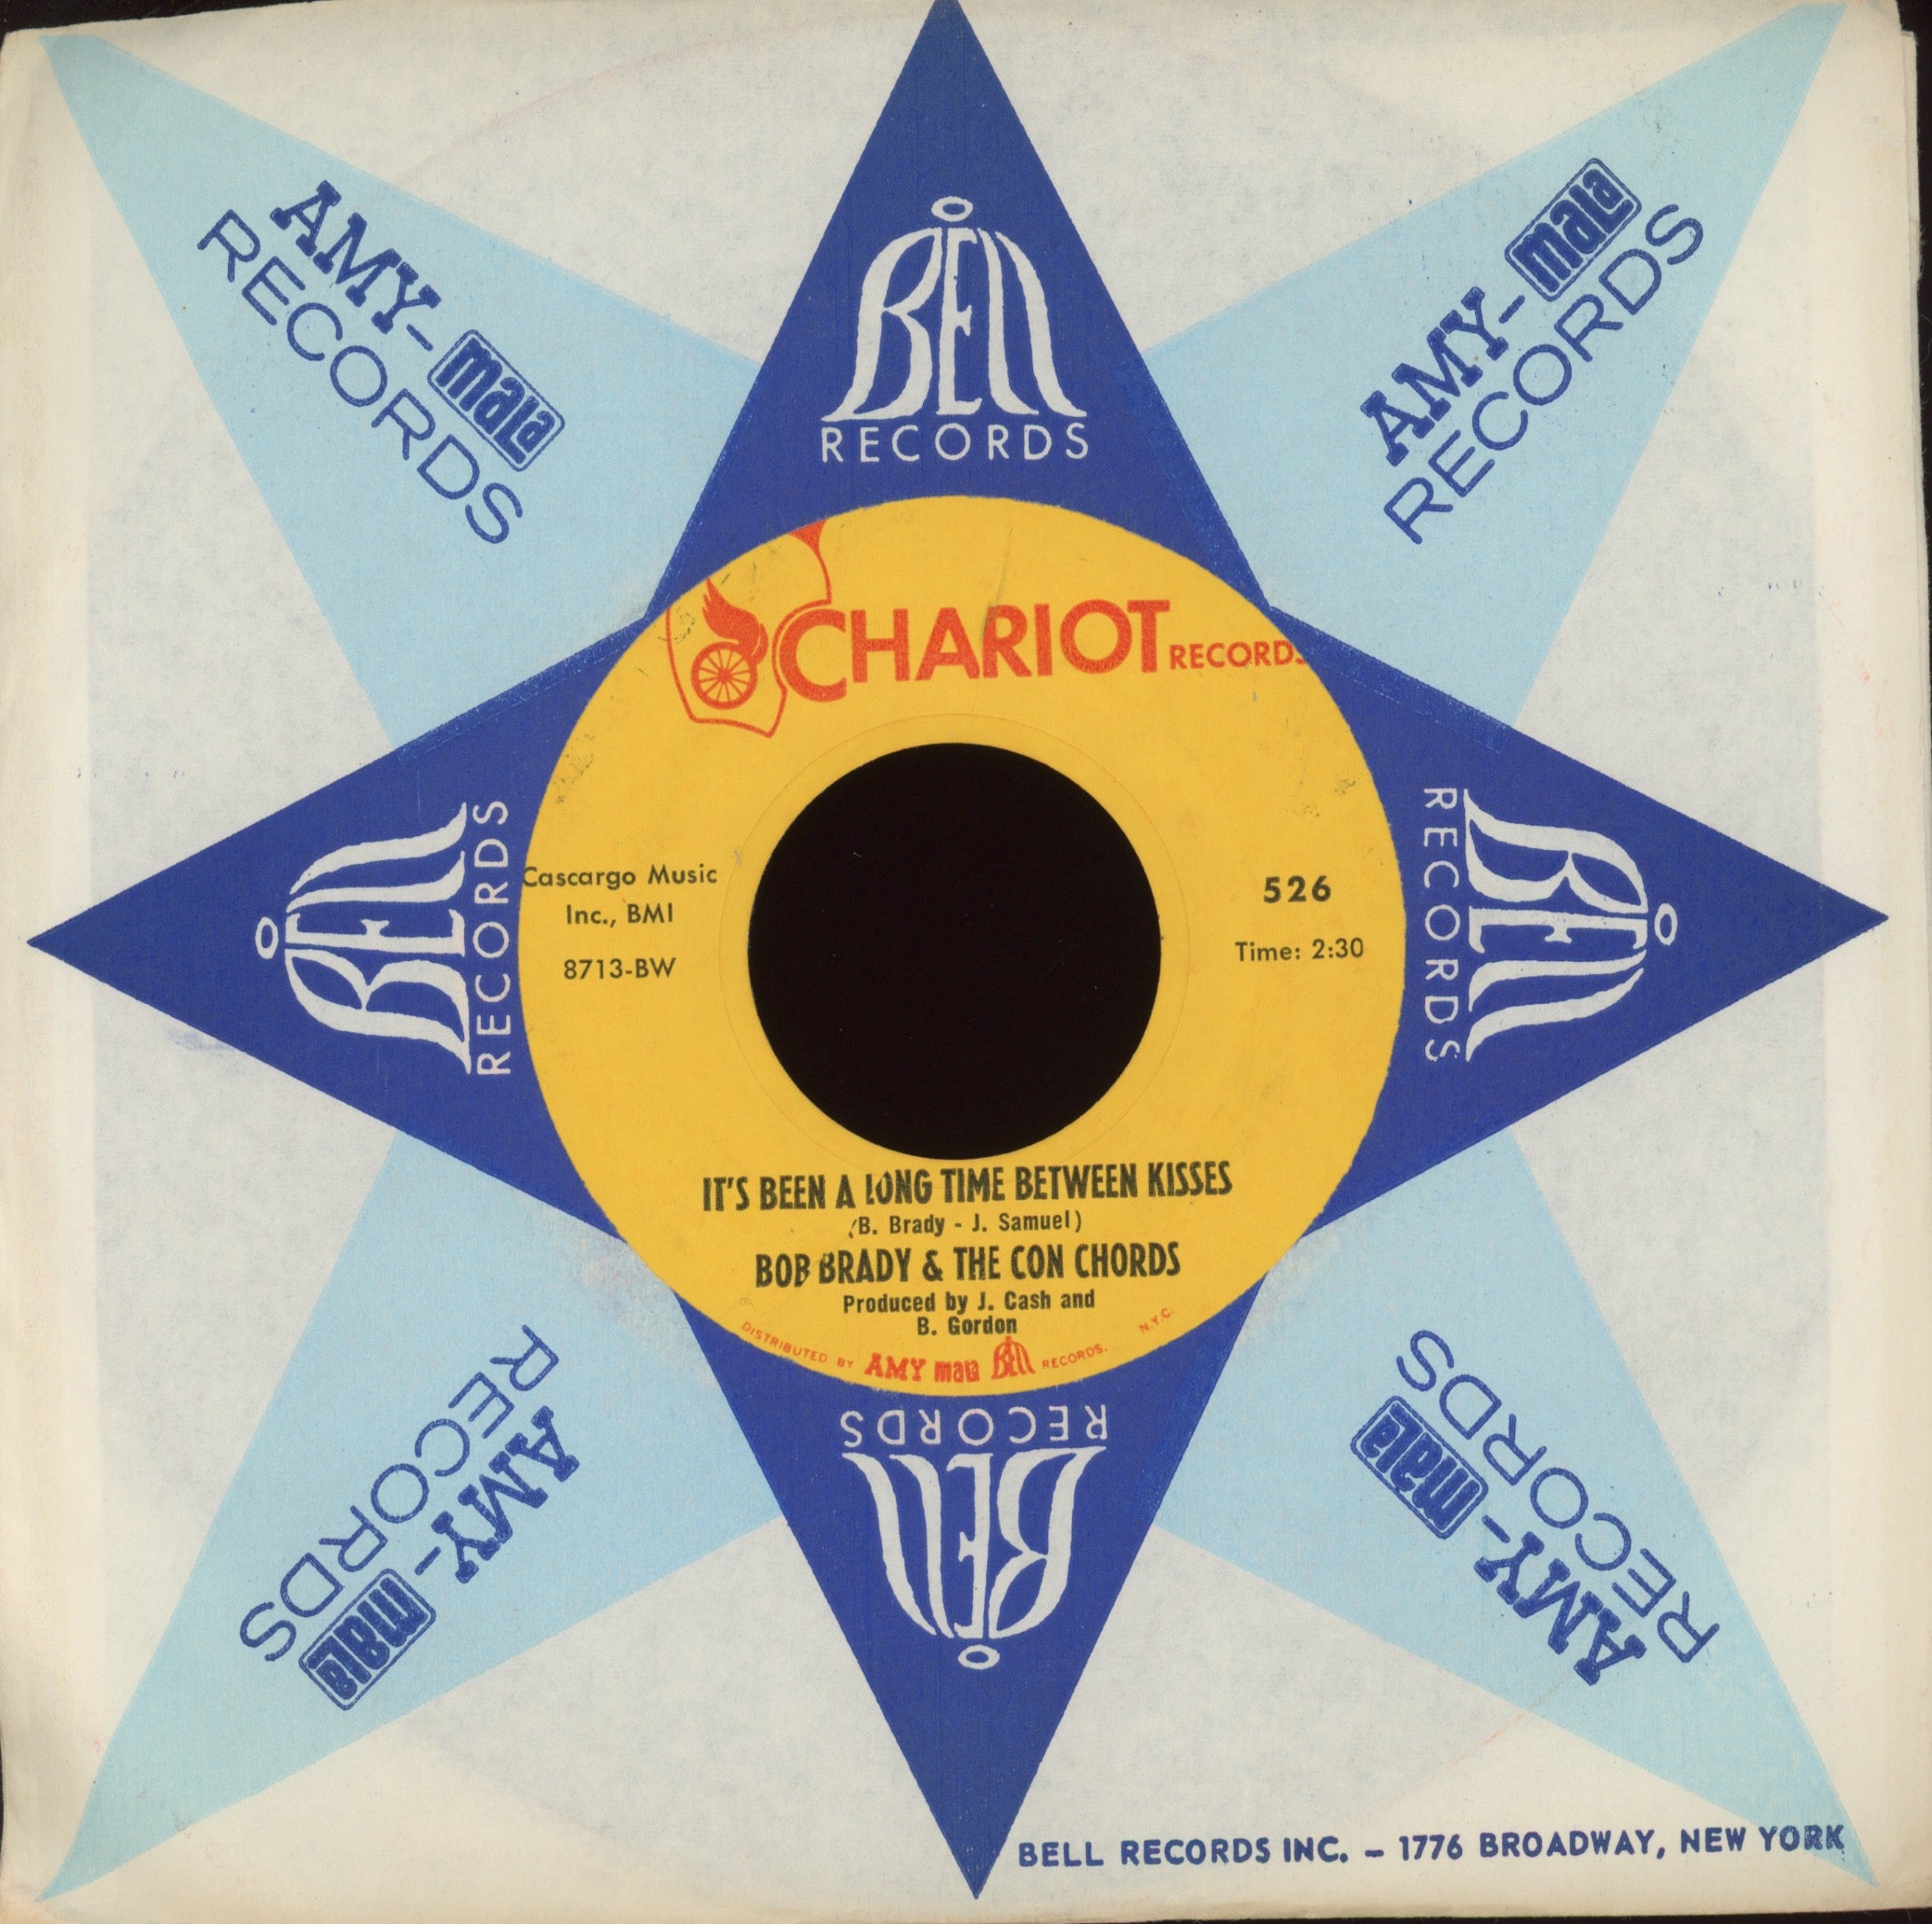 Bob Brady & The Con Chords - Everybody's Goin' To The Love-In on Chariot Northern Soul 45